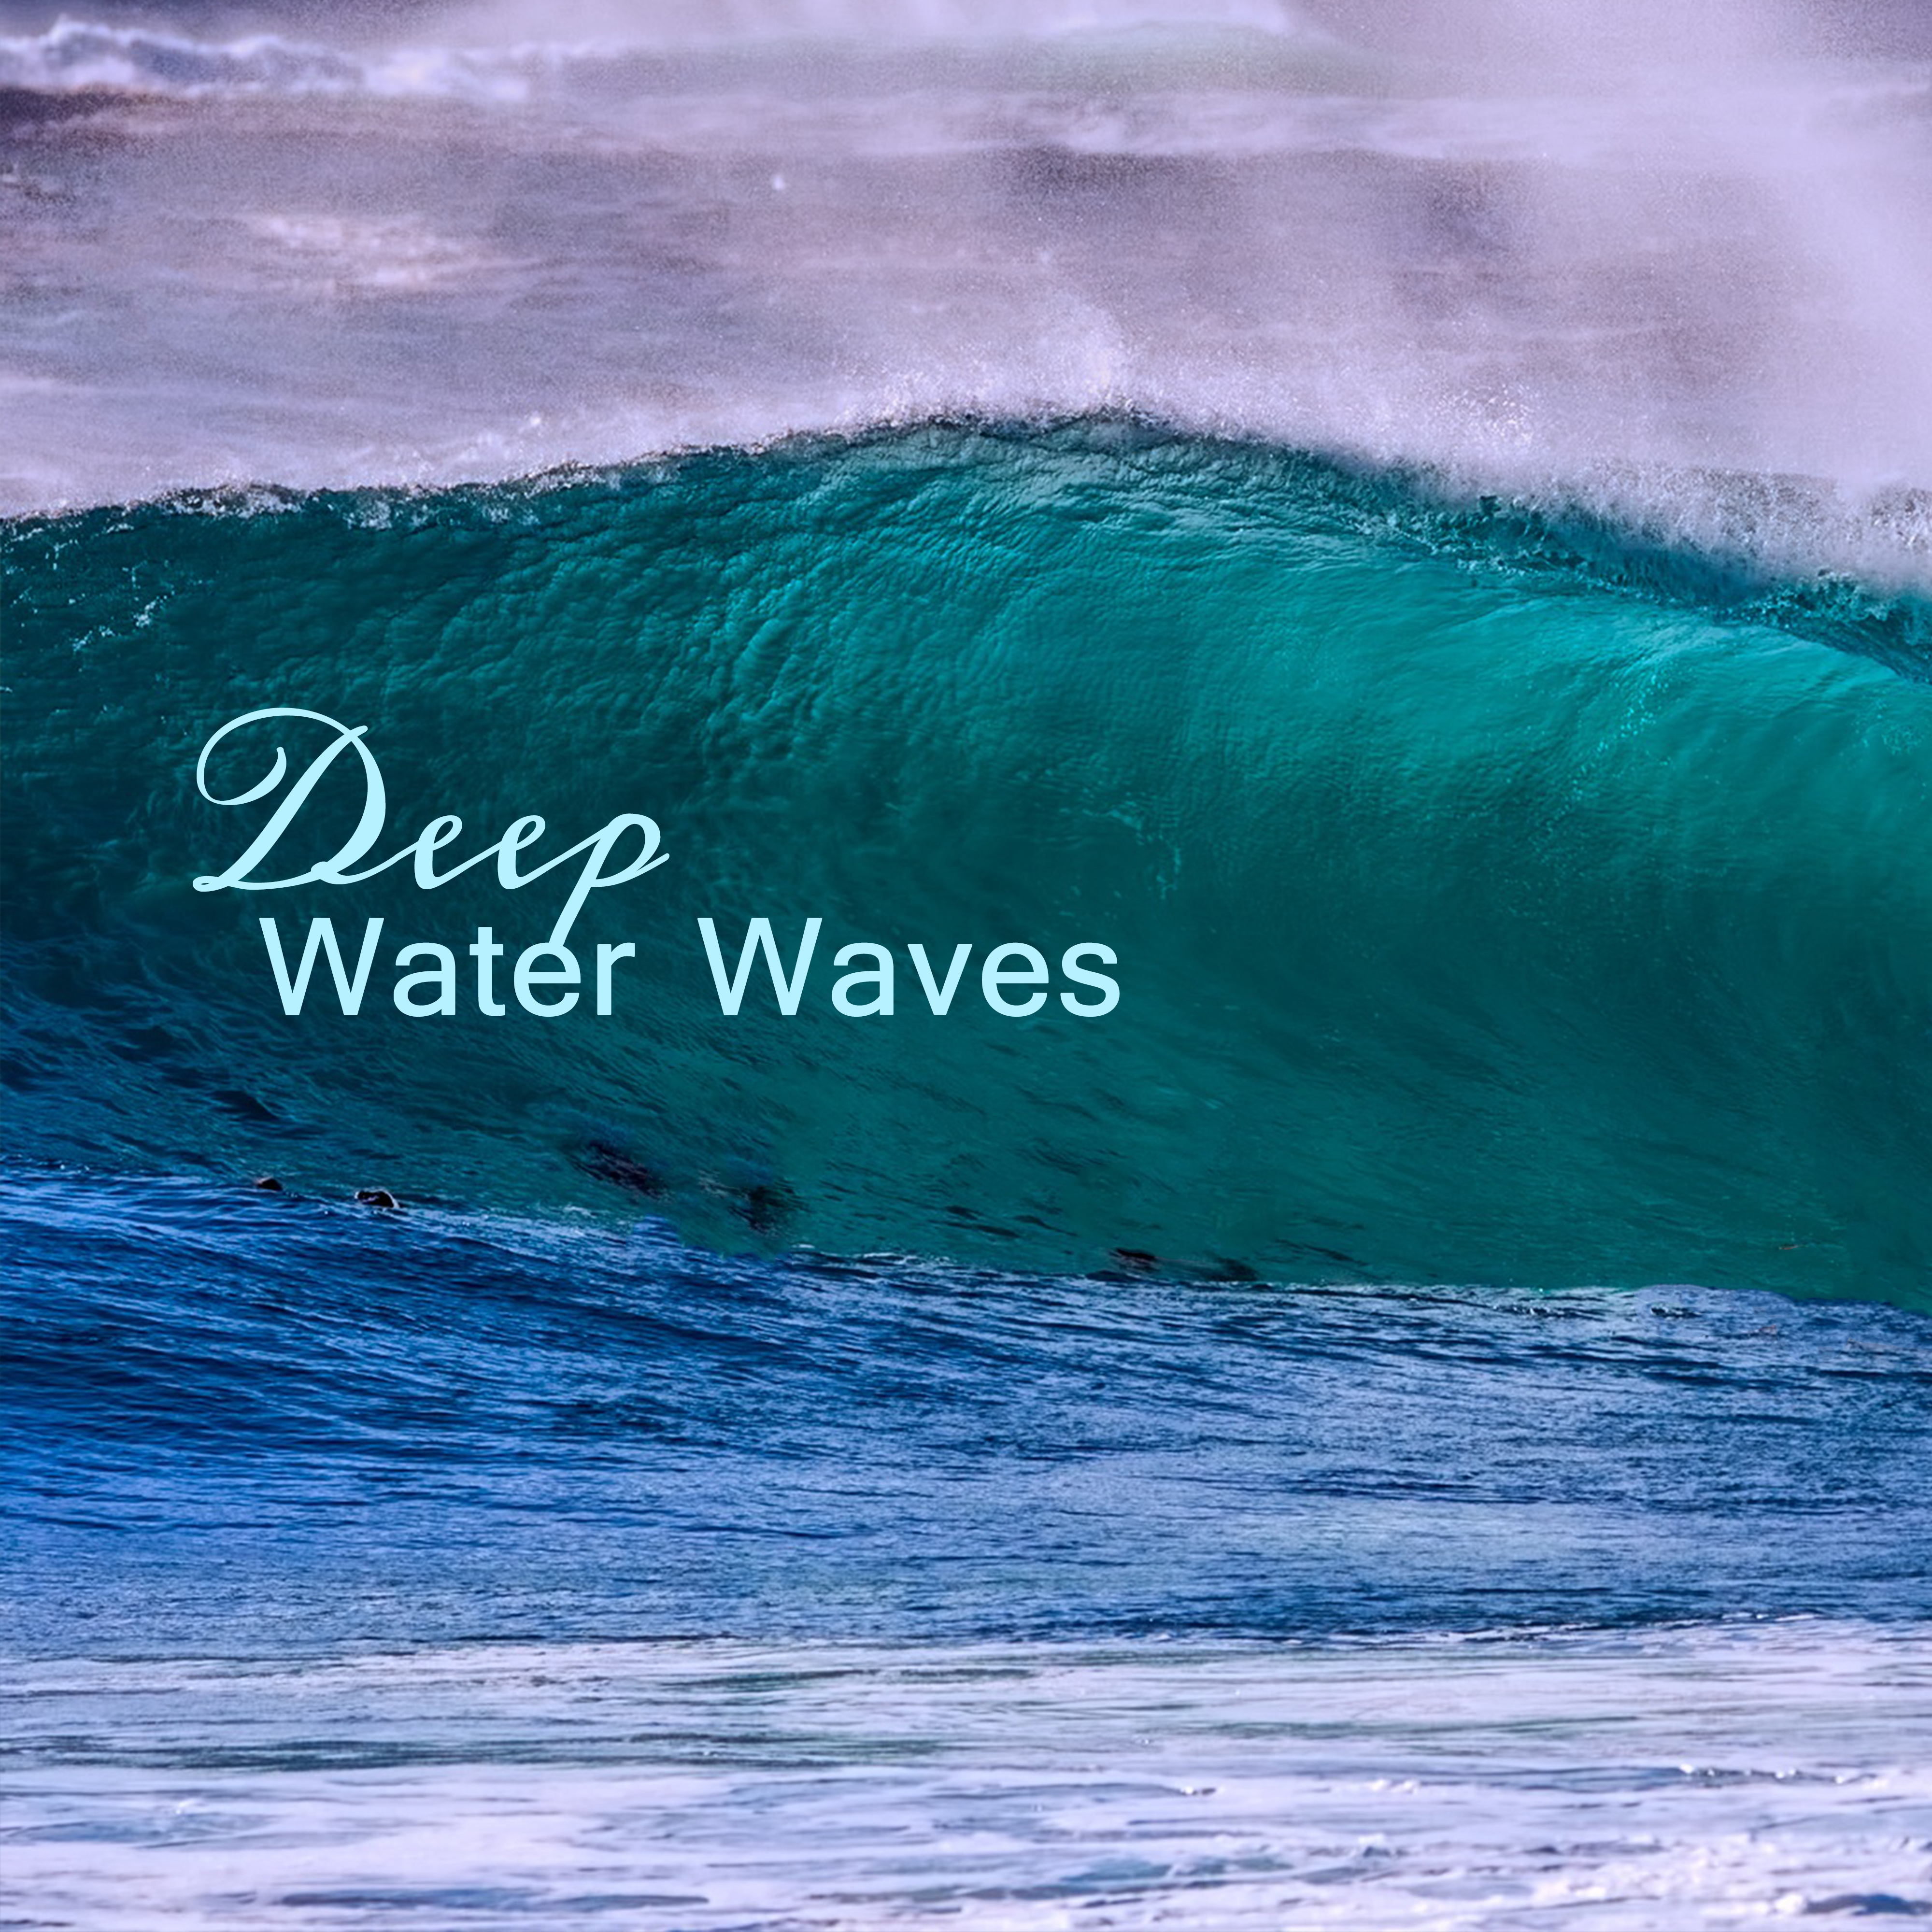 Deep Water Waves  Peaceful Nature Music, Rest with Ocean Sounds, New Age Relaxation Melodies